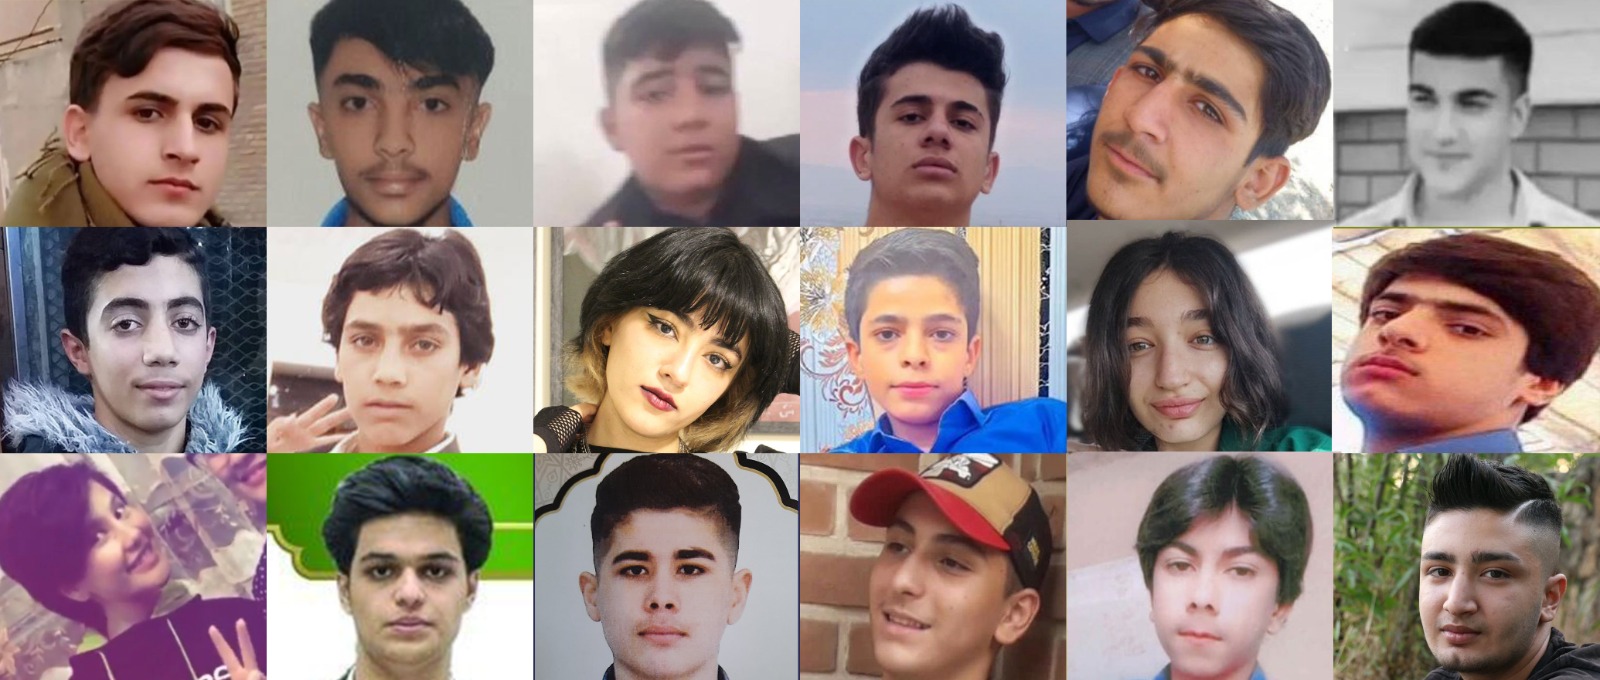 Iran: At least 23 children killed with impunity during brutal crackdown on youthful protests